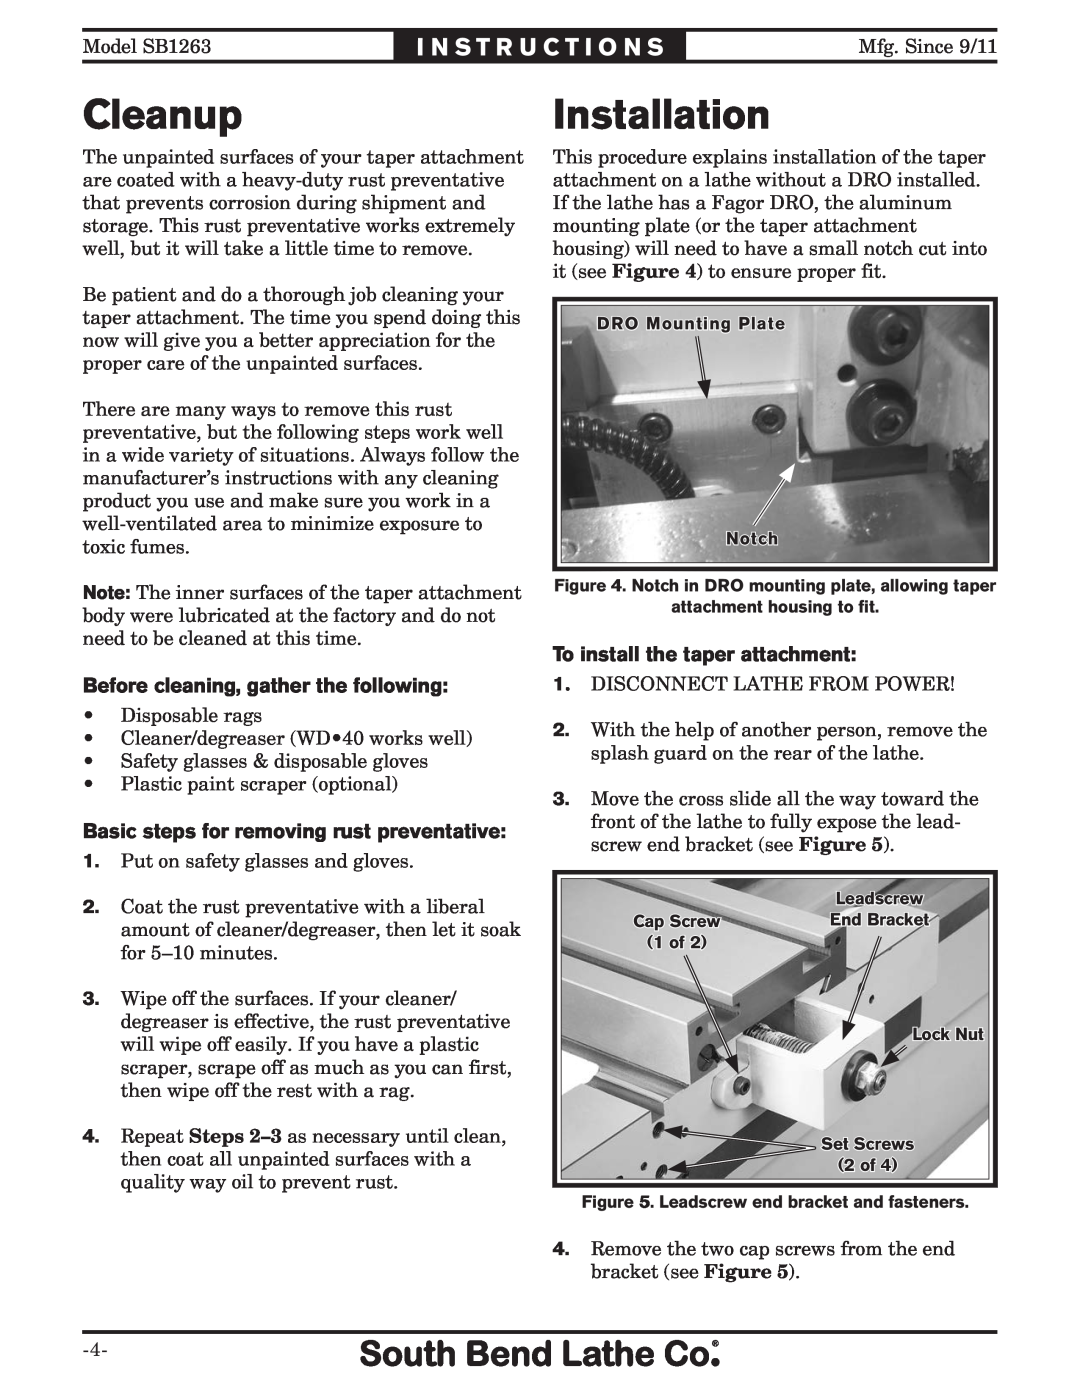 Southbend SB1263 Cleanup, Installation, Before cleaning, gather the following, Basic steps for removing rust preventative 